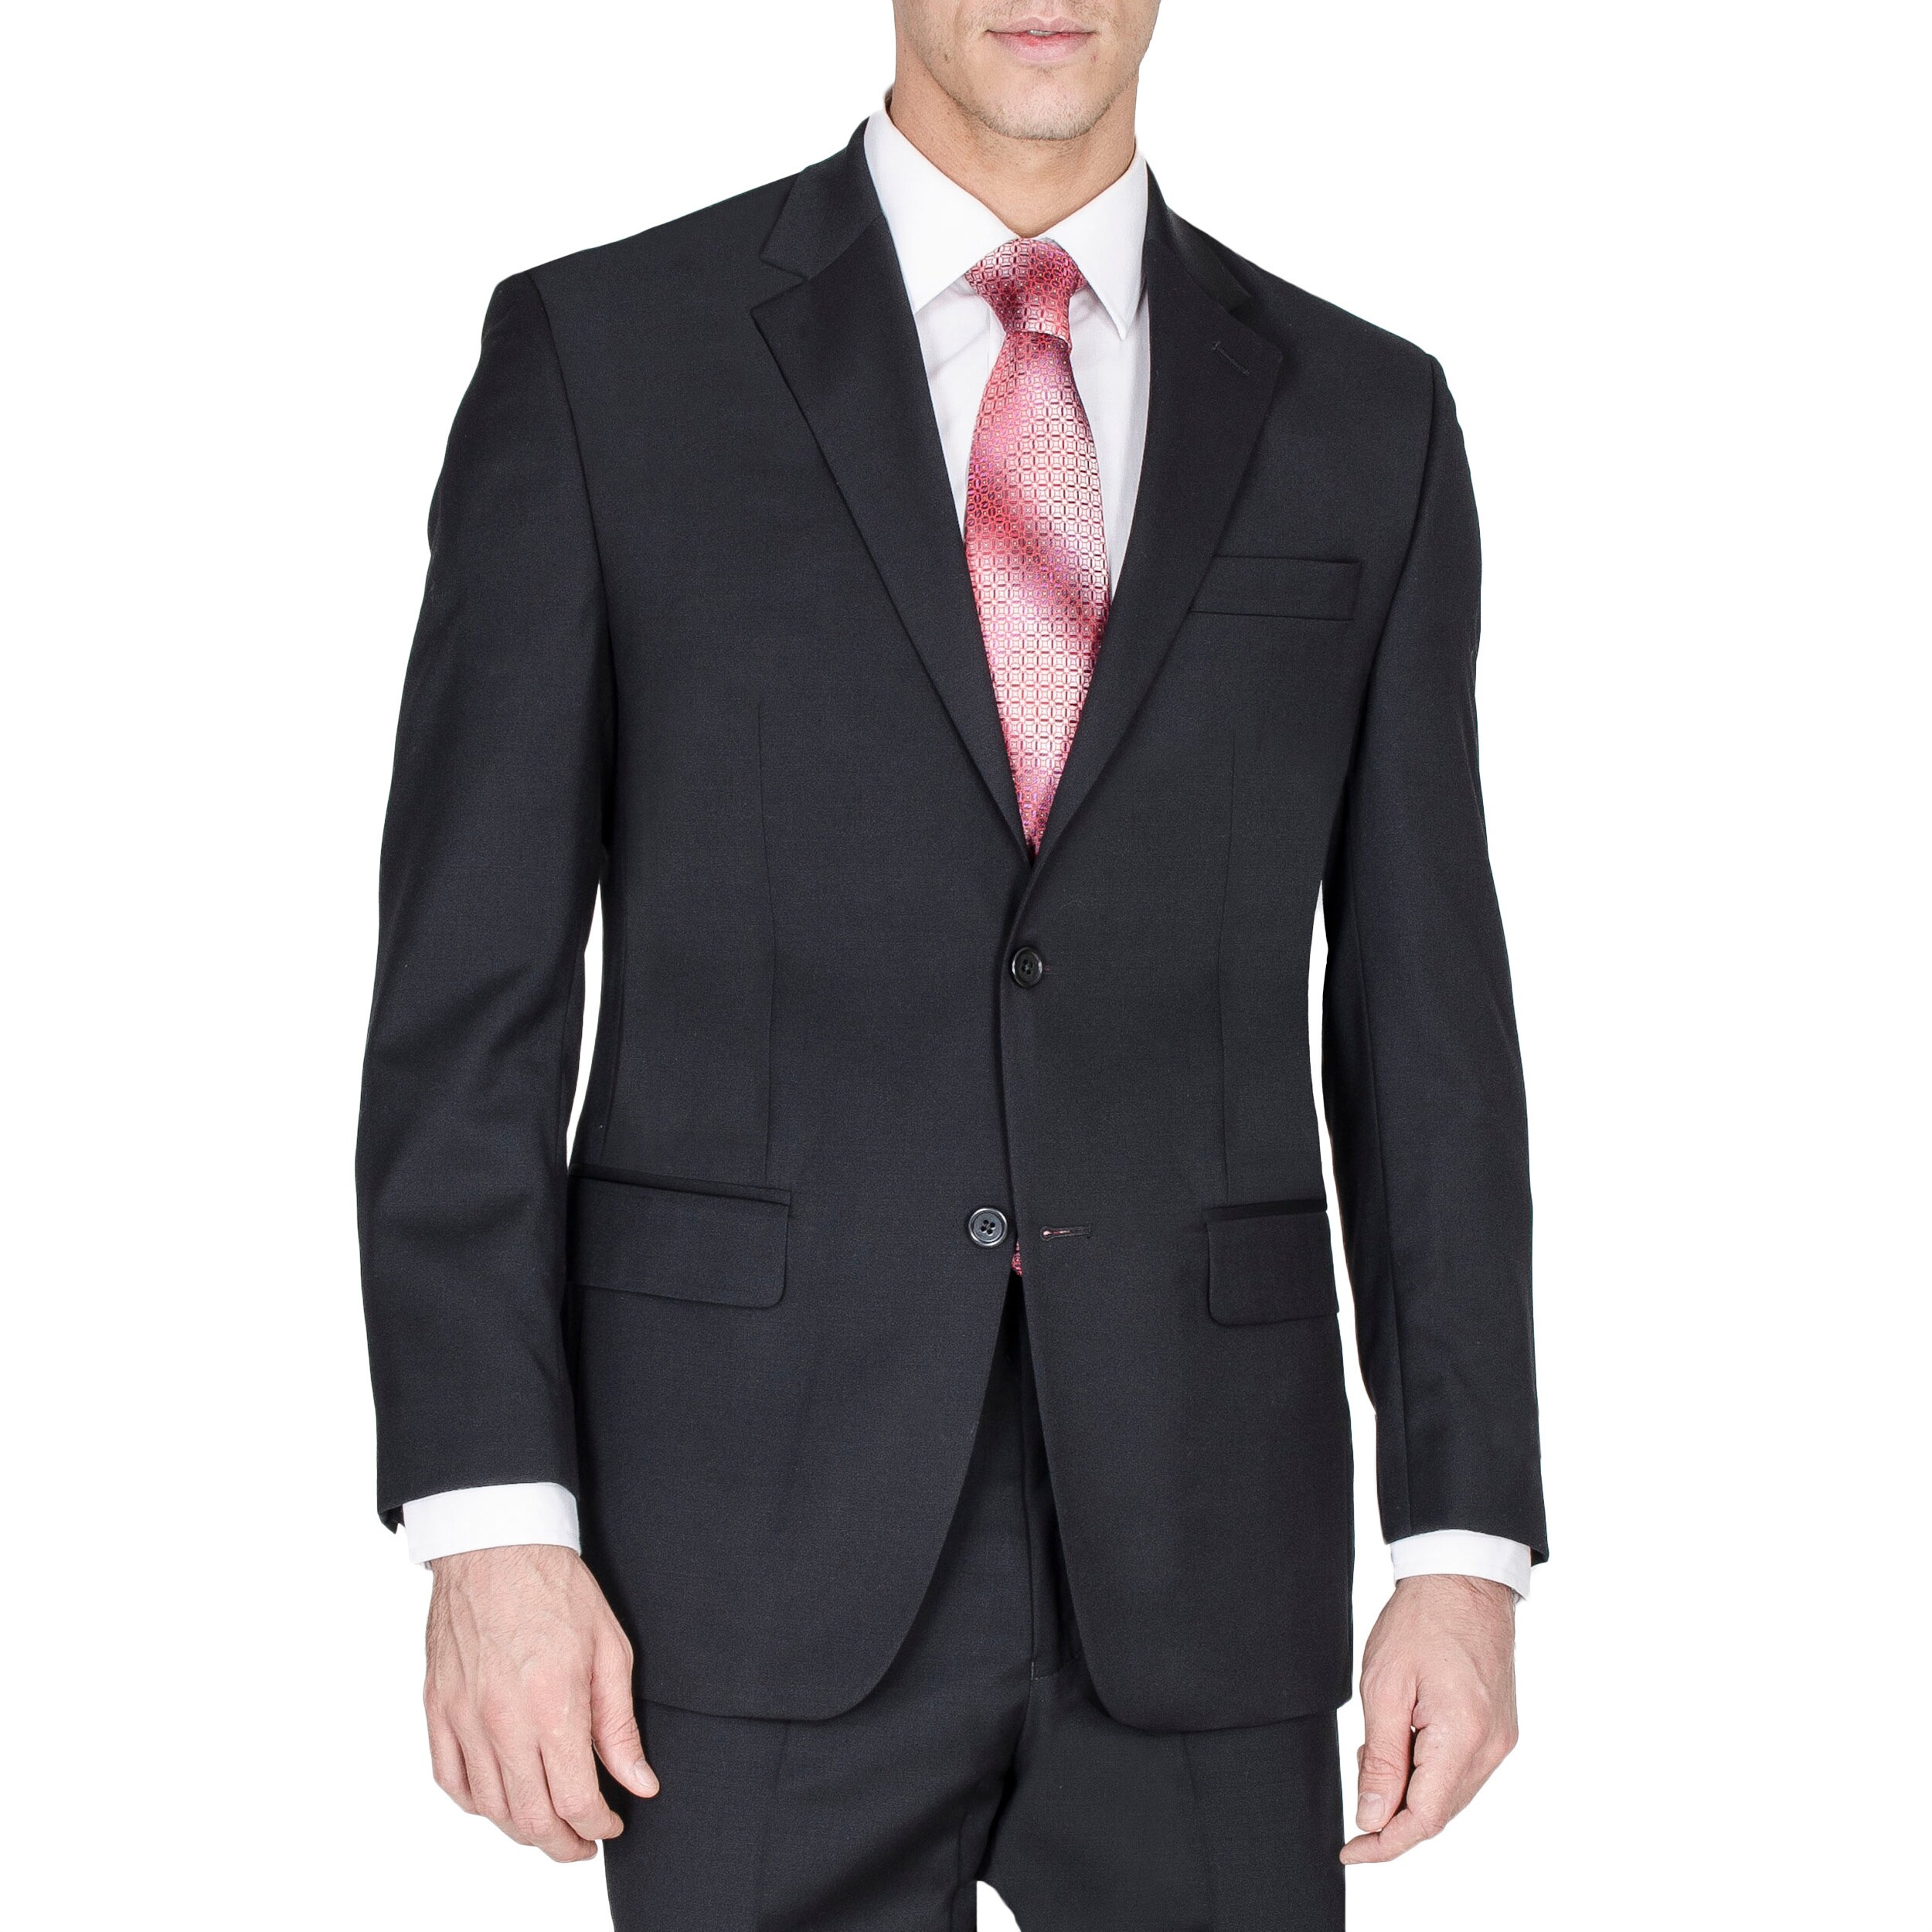 Men's Solid Black Two-button Suit - Overstock Shopping - Big Discounts ...